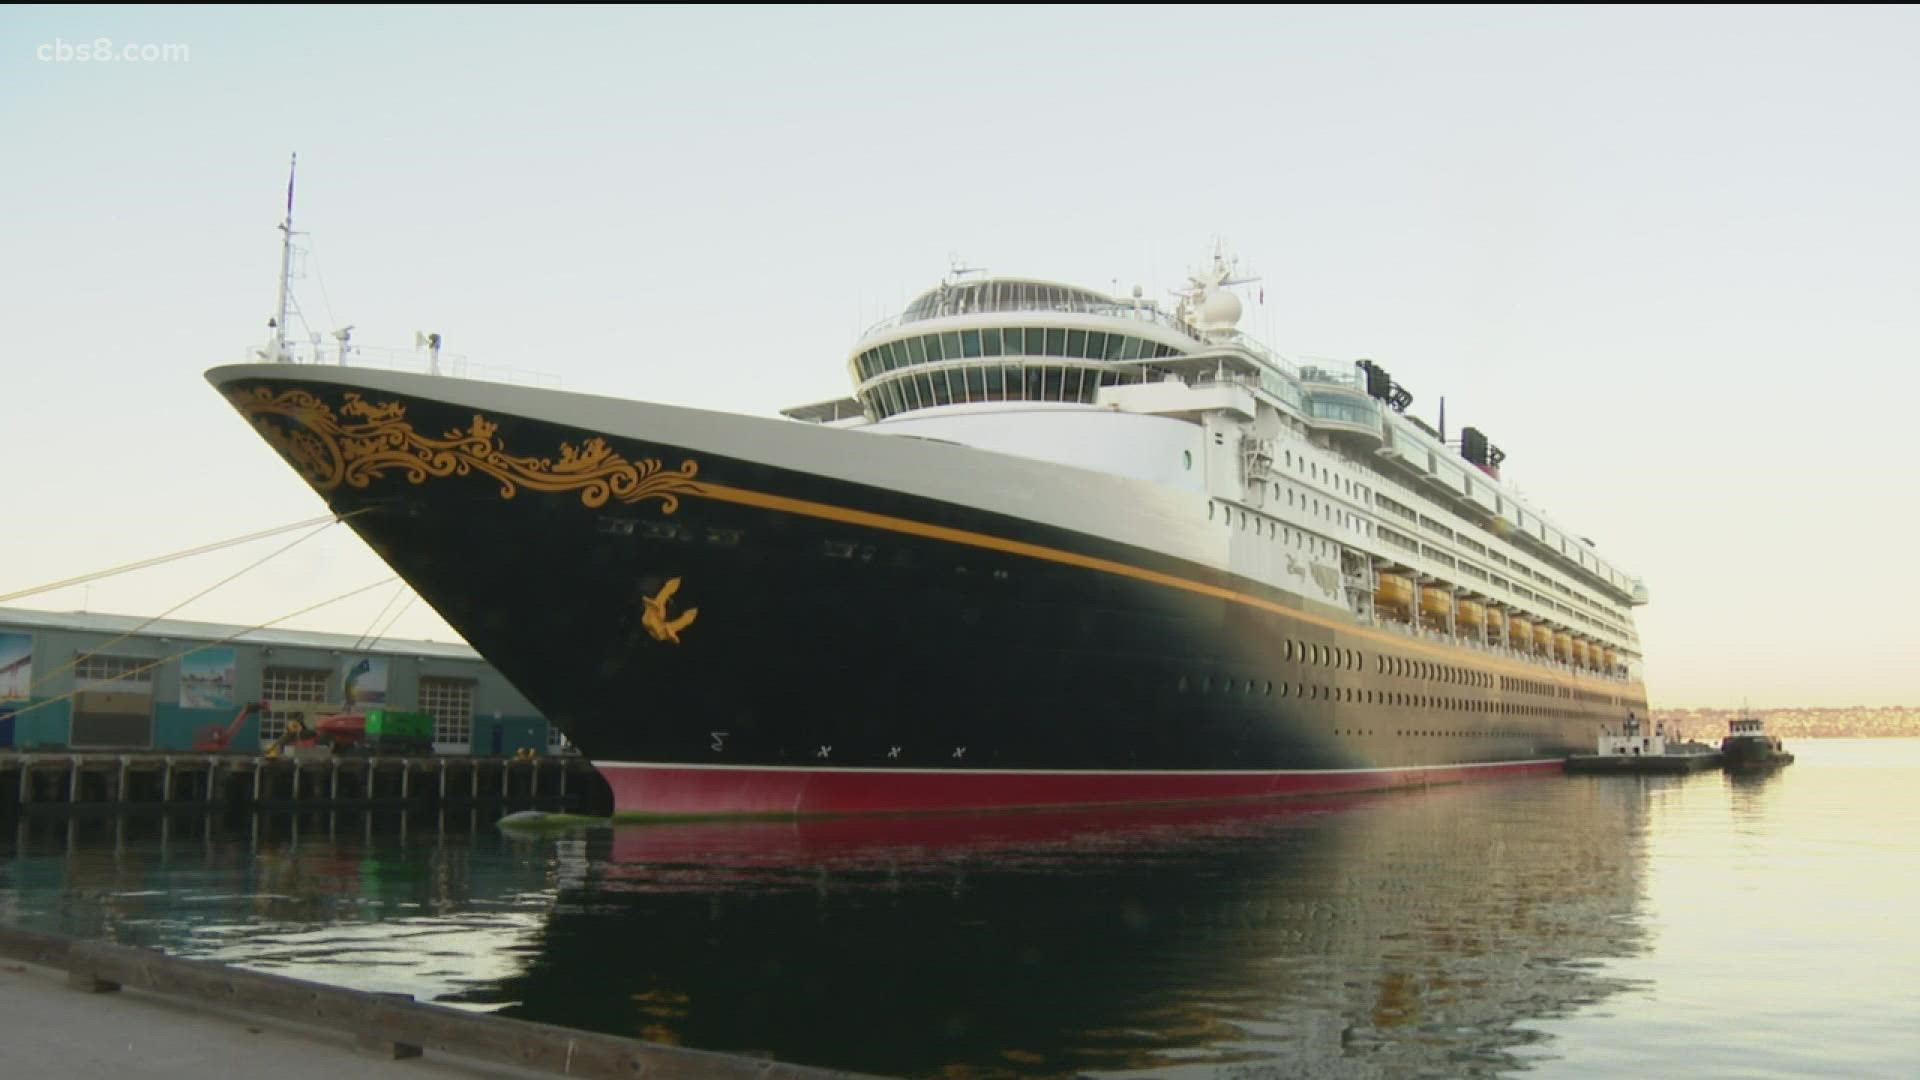 The Disney Wonder and Grand Princess are the first sailings out of San Diego since the pandemic began.